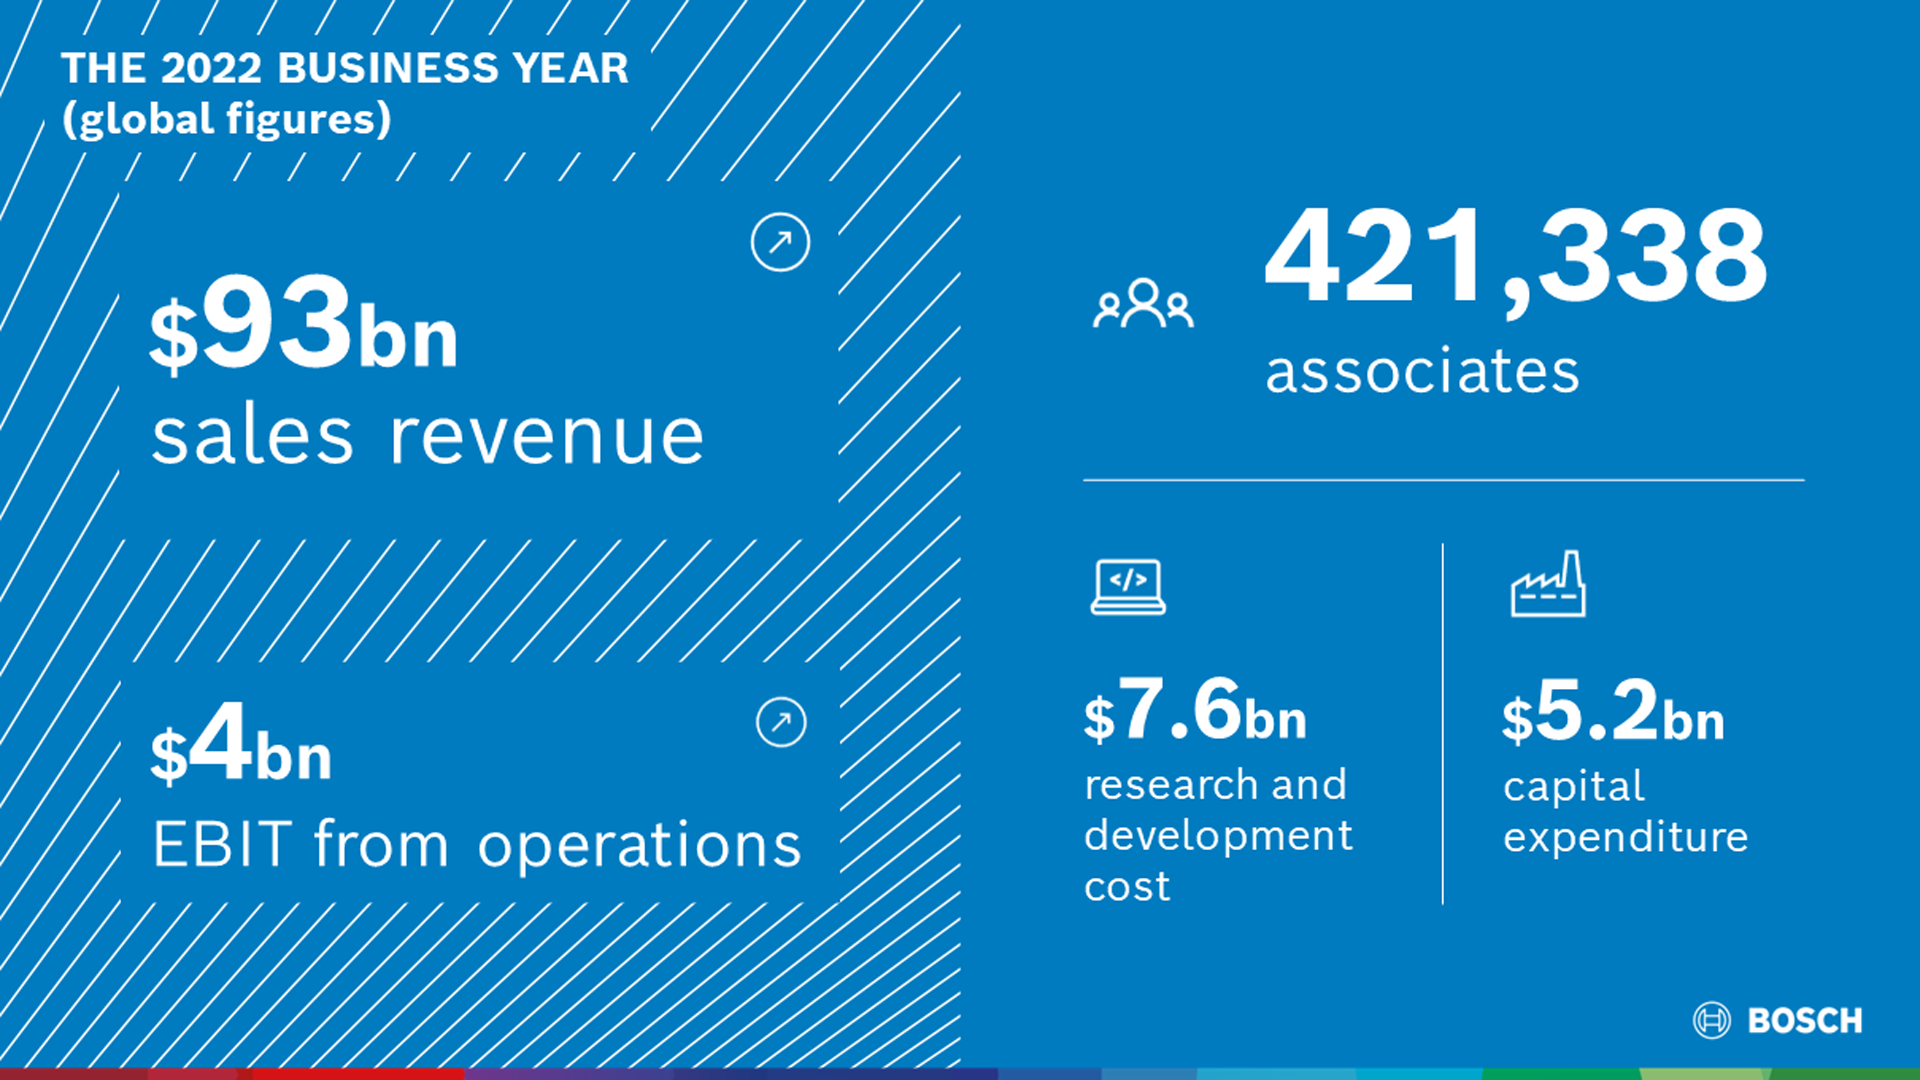 Key data of the 2022 business year